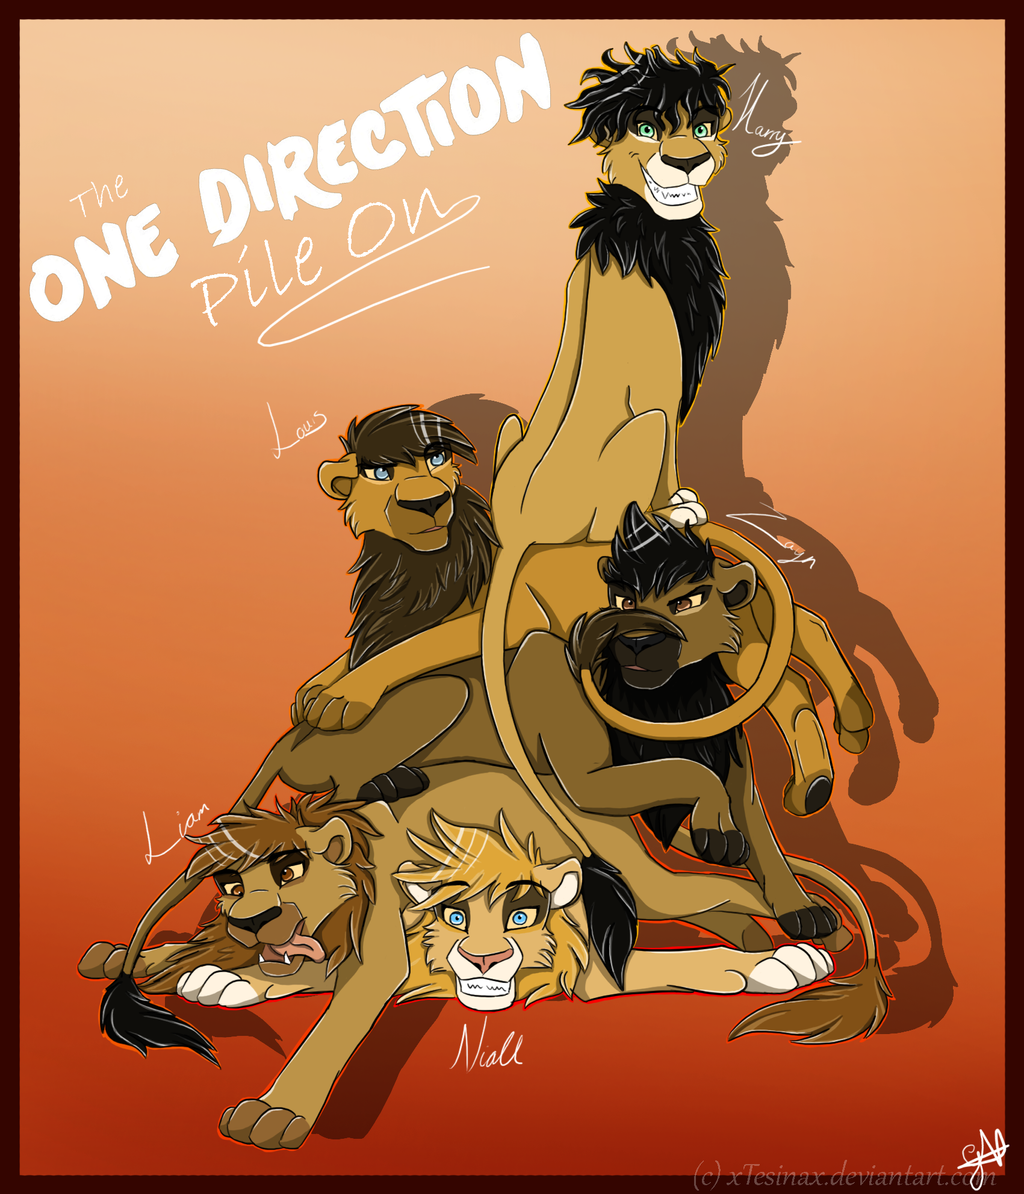 One Direction & El Rey Leon !! The_one_direction_pile_on_by_xtesinax-d4hdk7w